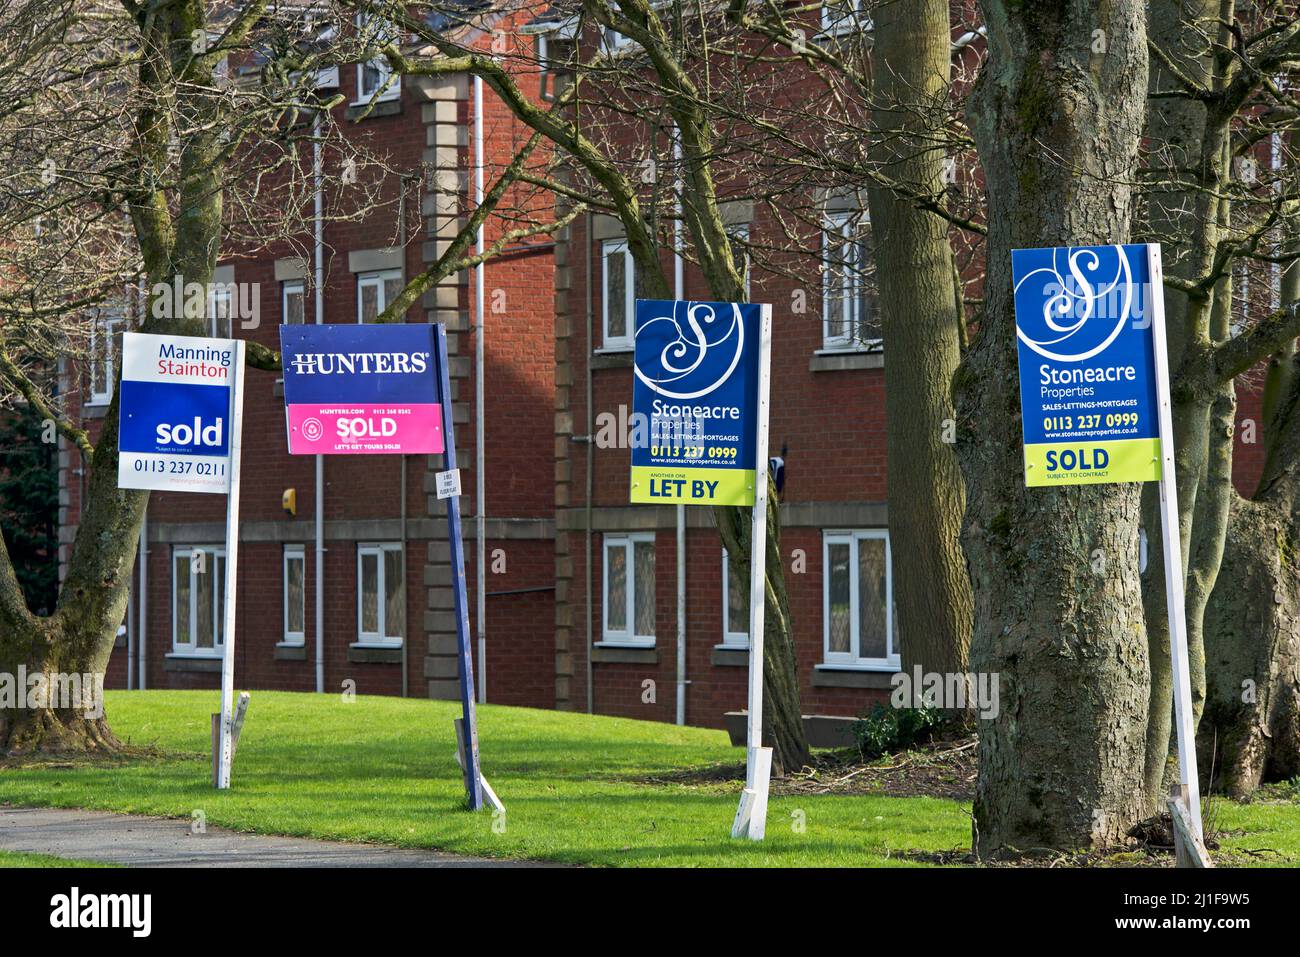 Signs - properties for sale, sold, let and to let - on suburban street, England UK Stock Photo